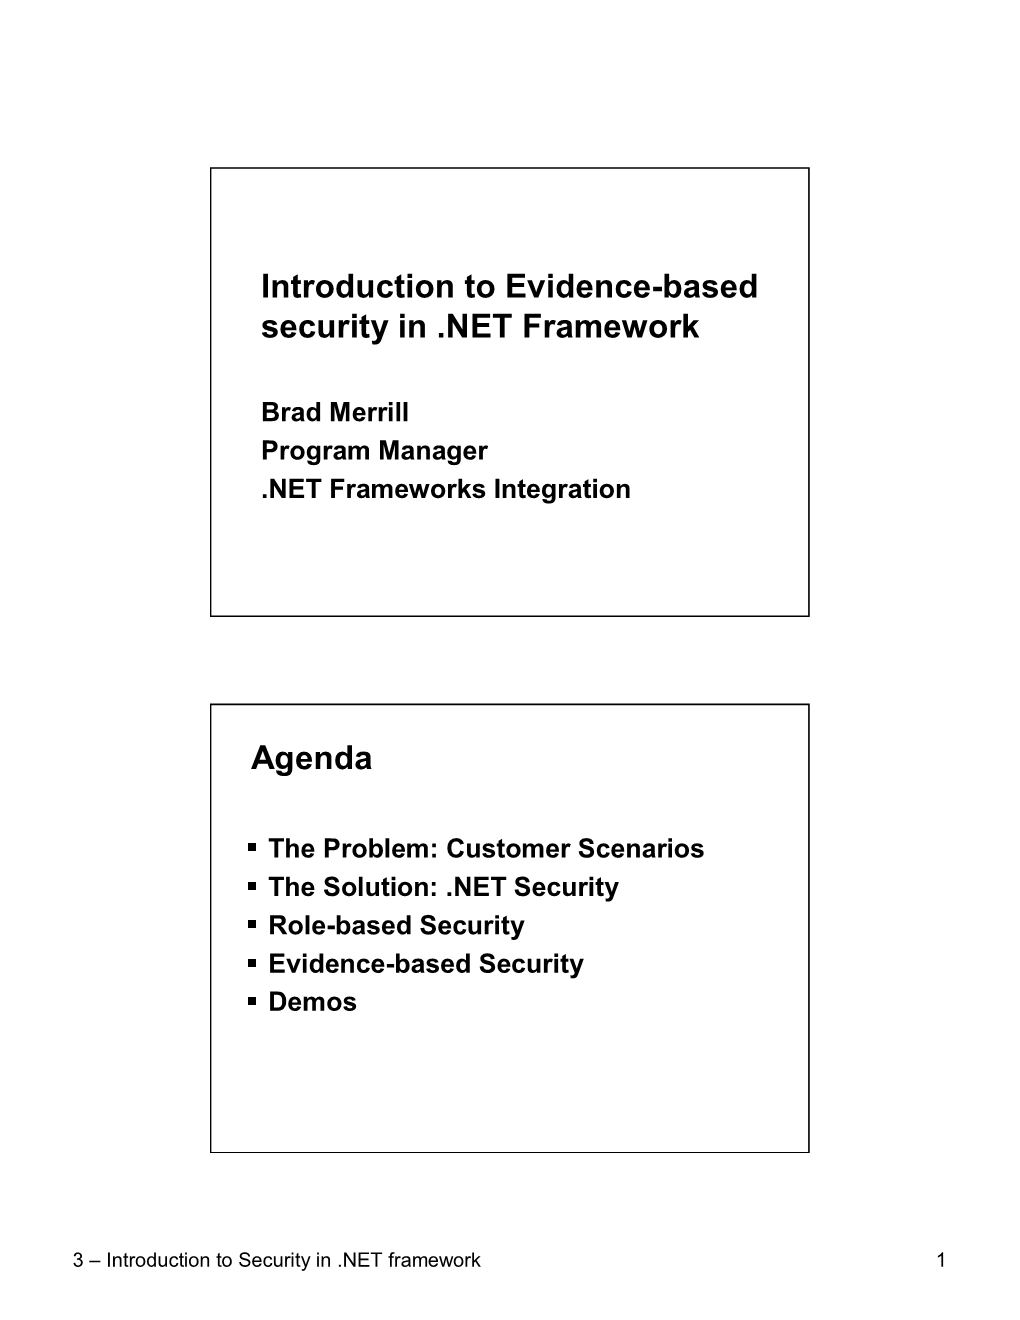 Introduction to Evidence-Based Security in .NET Framework Agenda